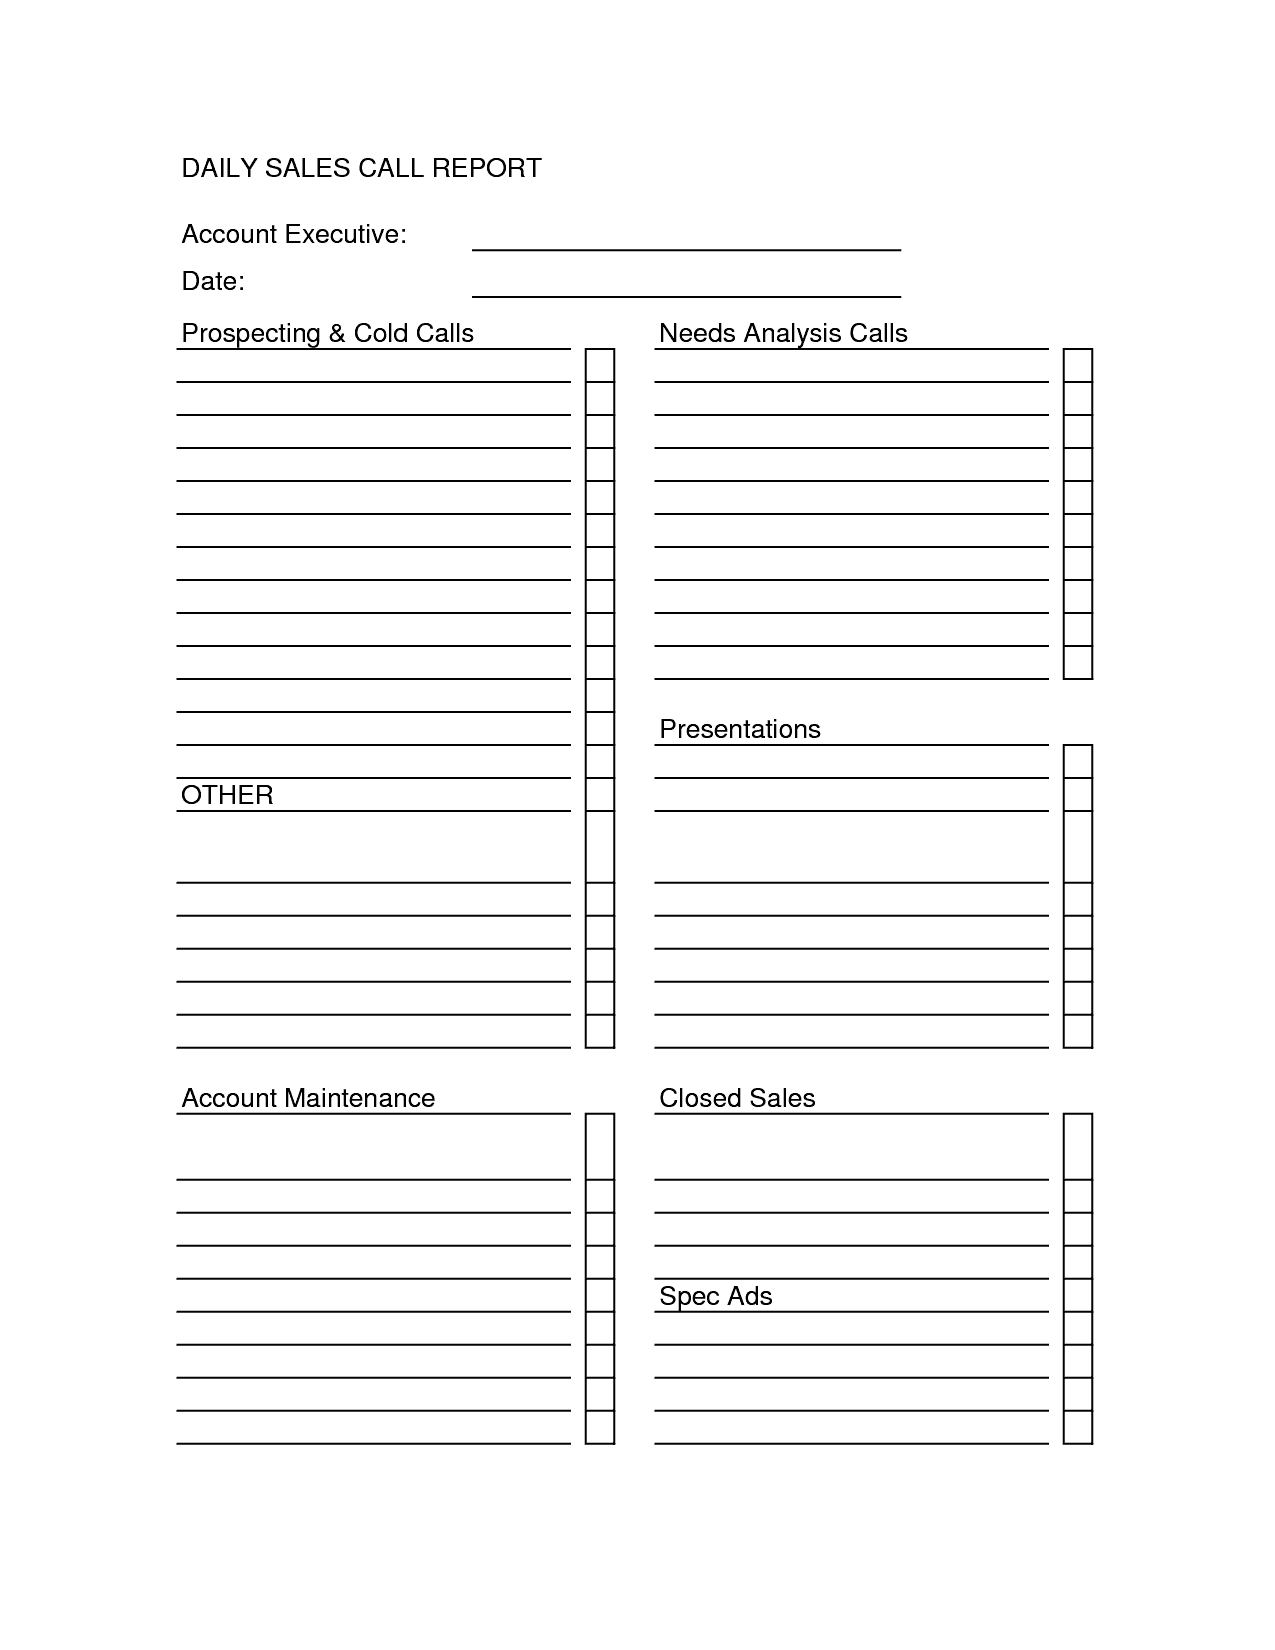 Sales Call Report Templates – Word Excel Fomats Regarding Daily Sales Call Report Template Free Download